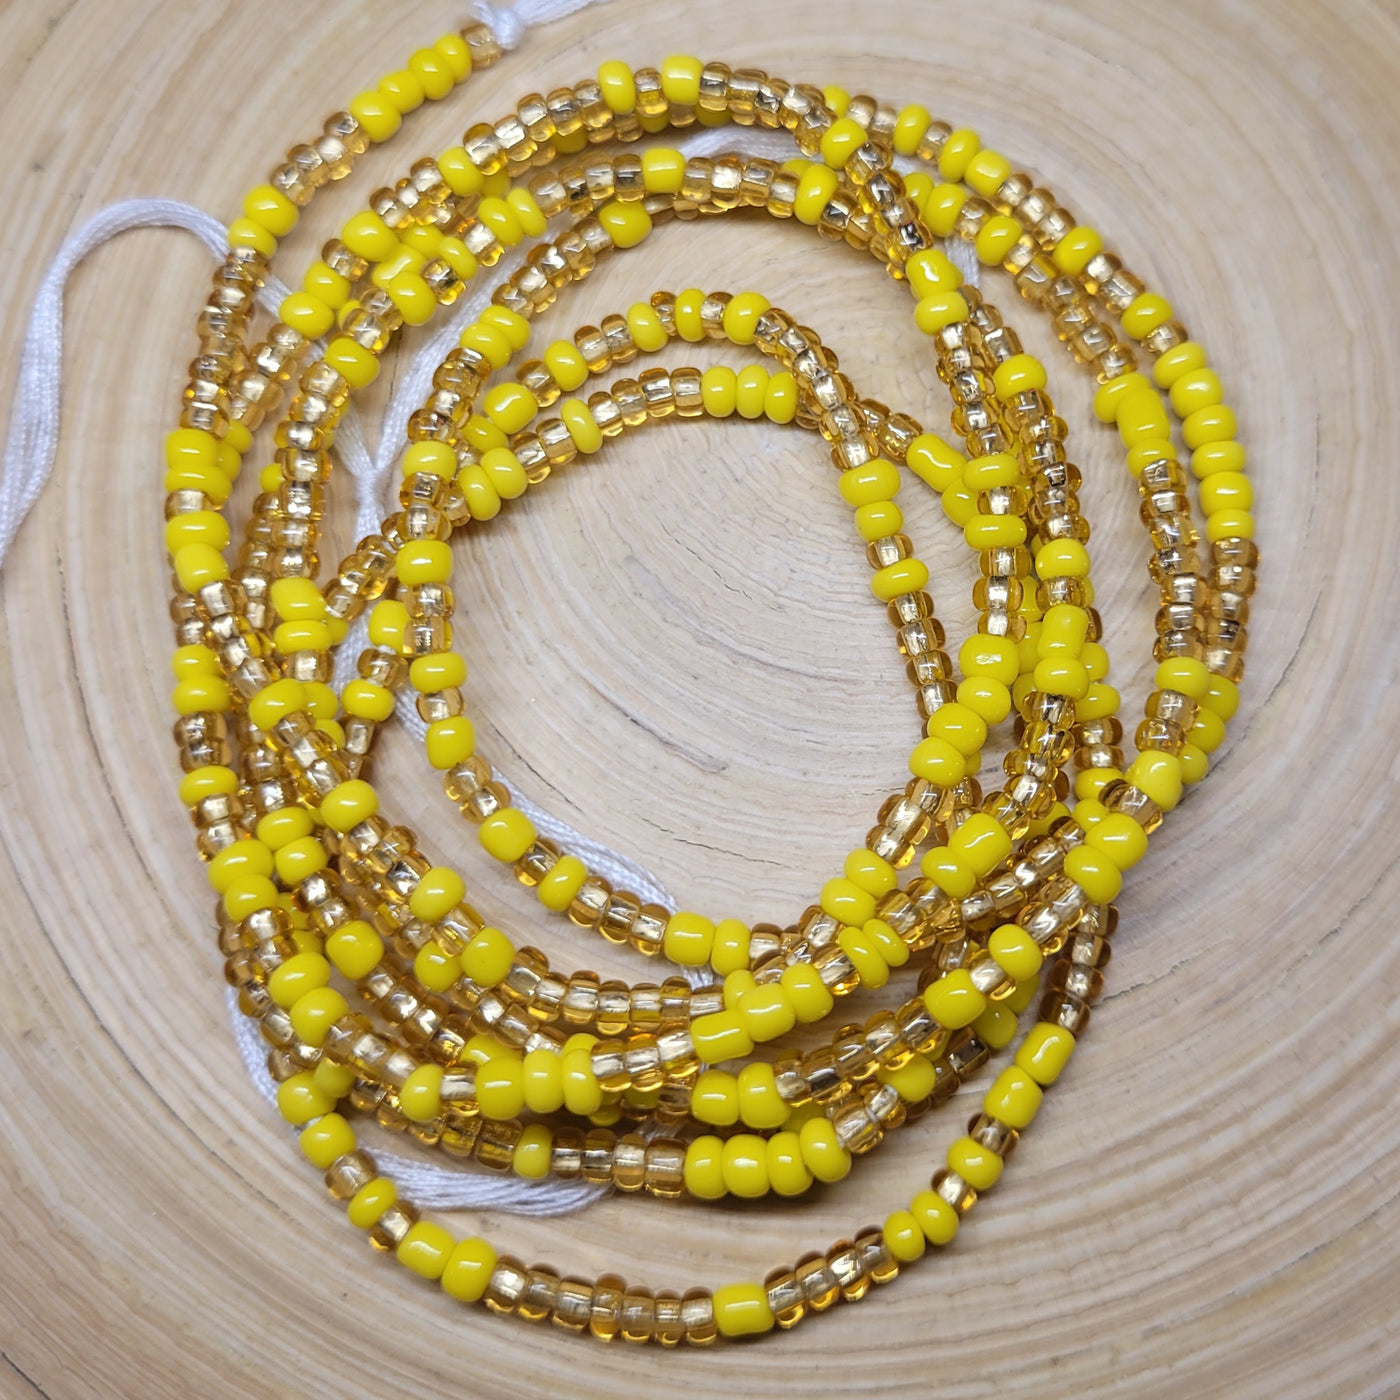 Two Toned "Yellow and Gold" Waist Beads